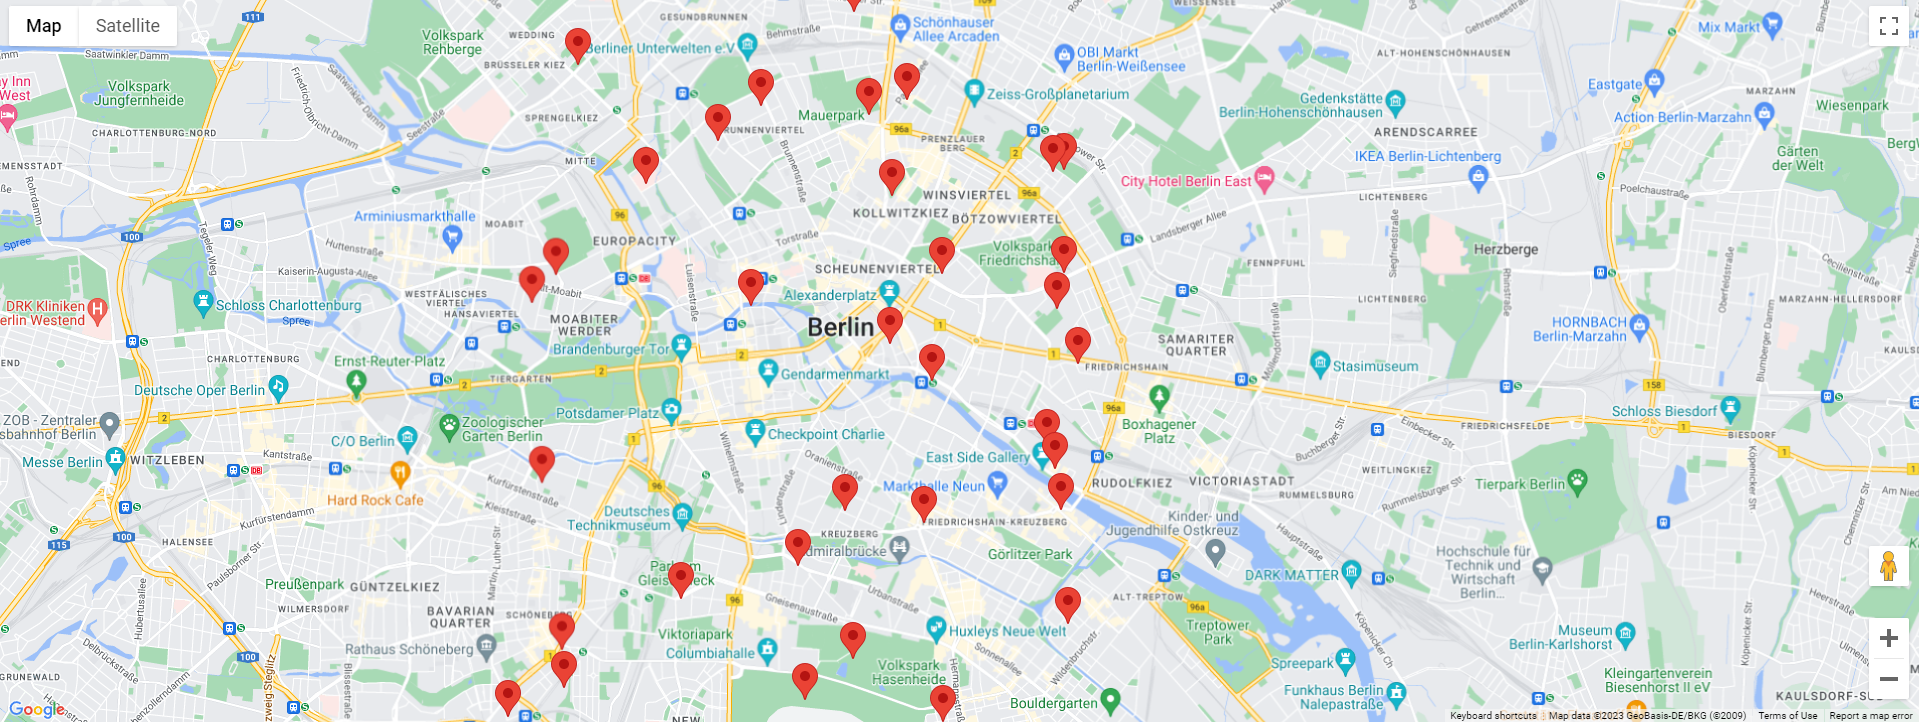 Google Maps with Markers